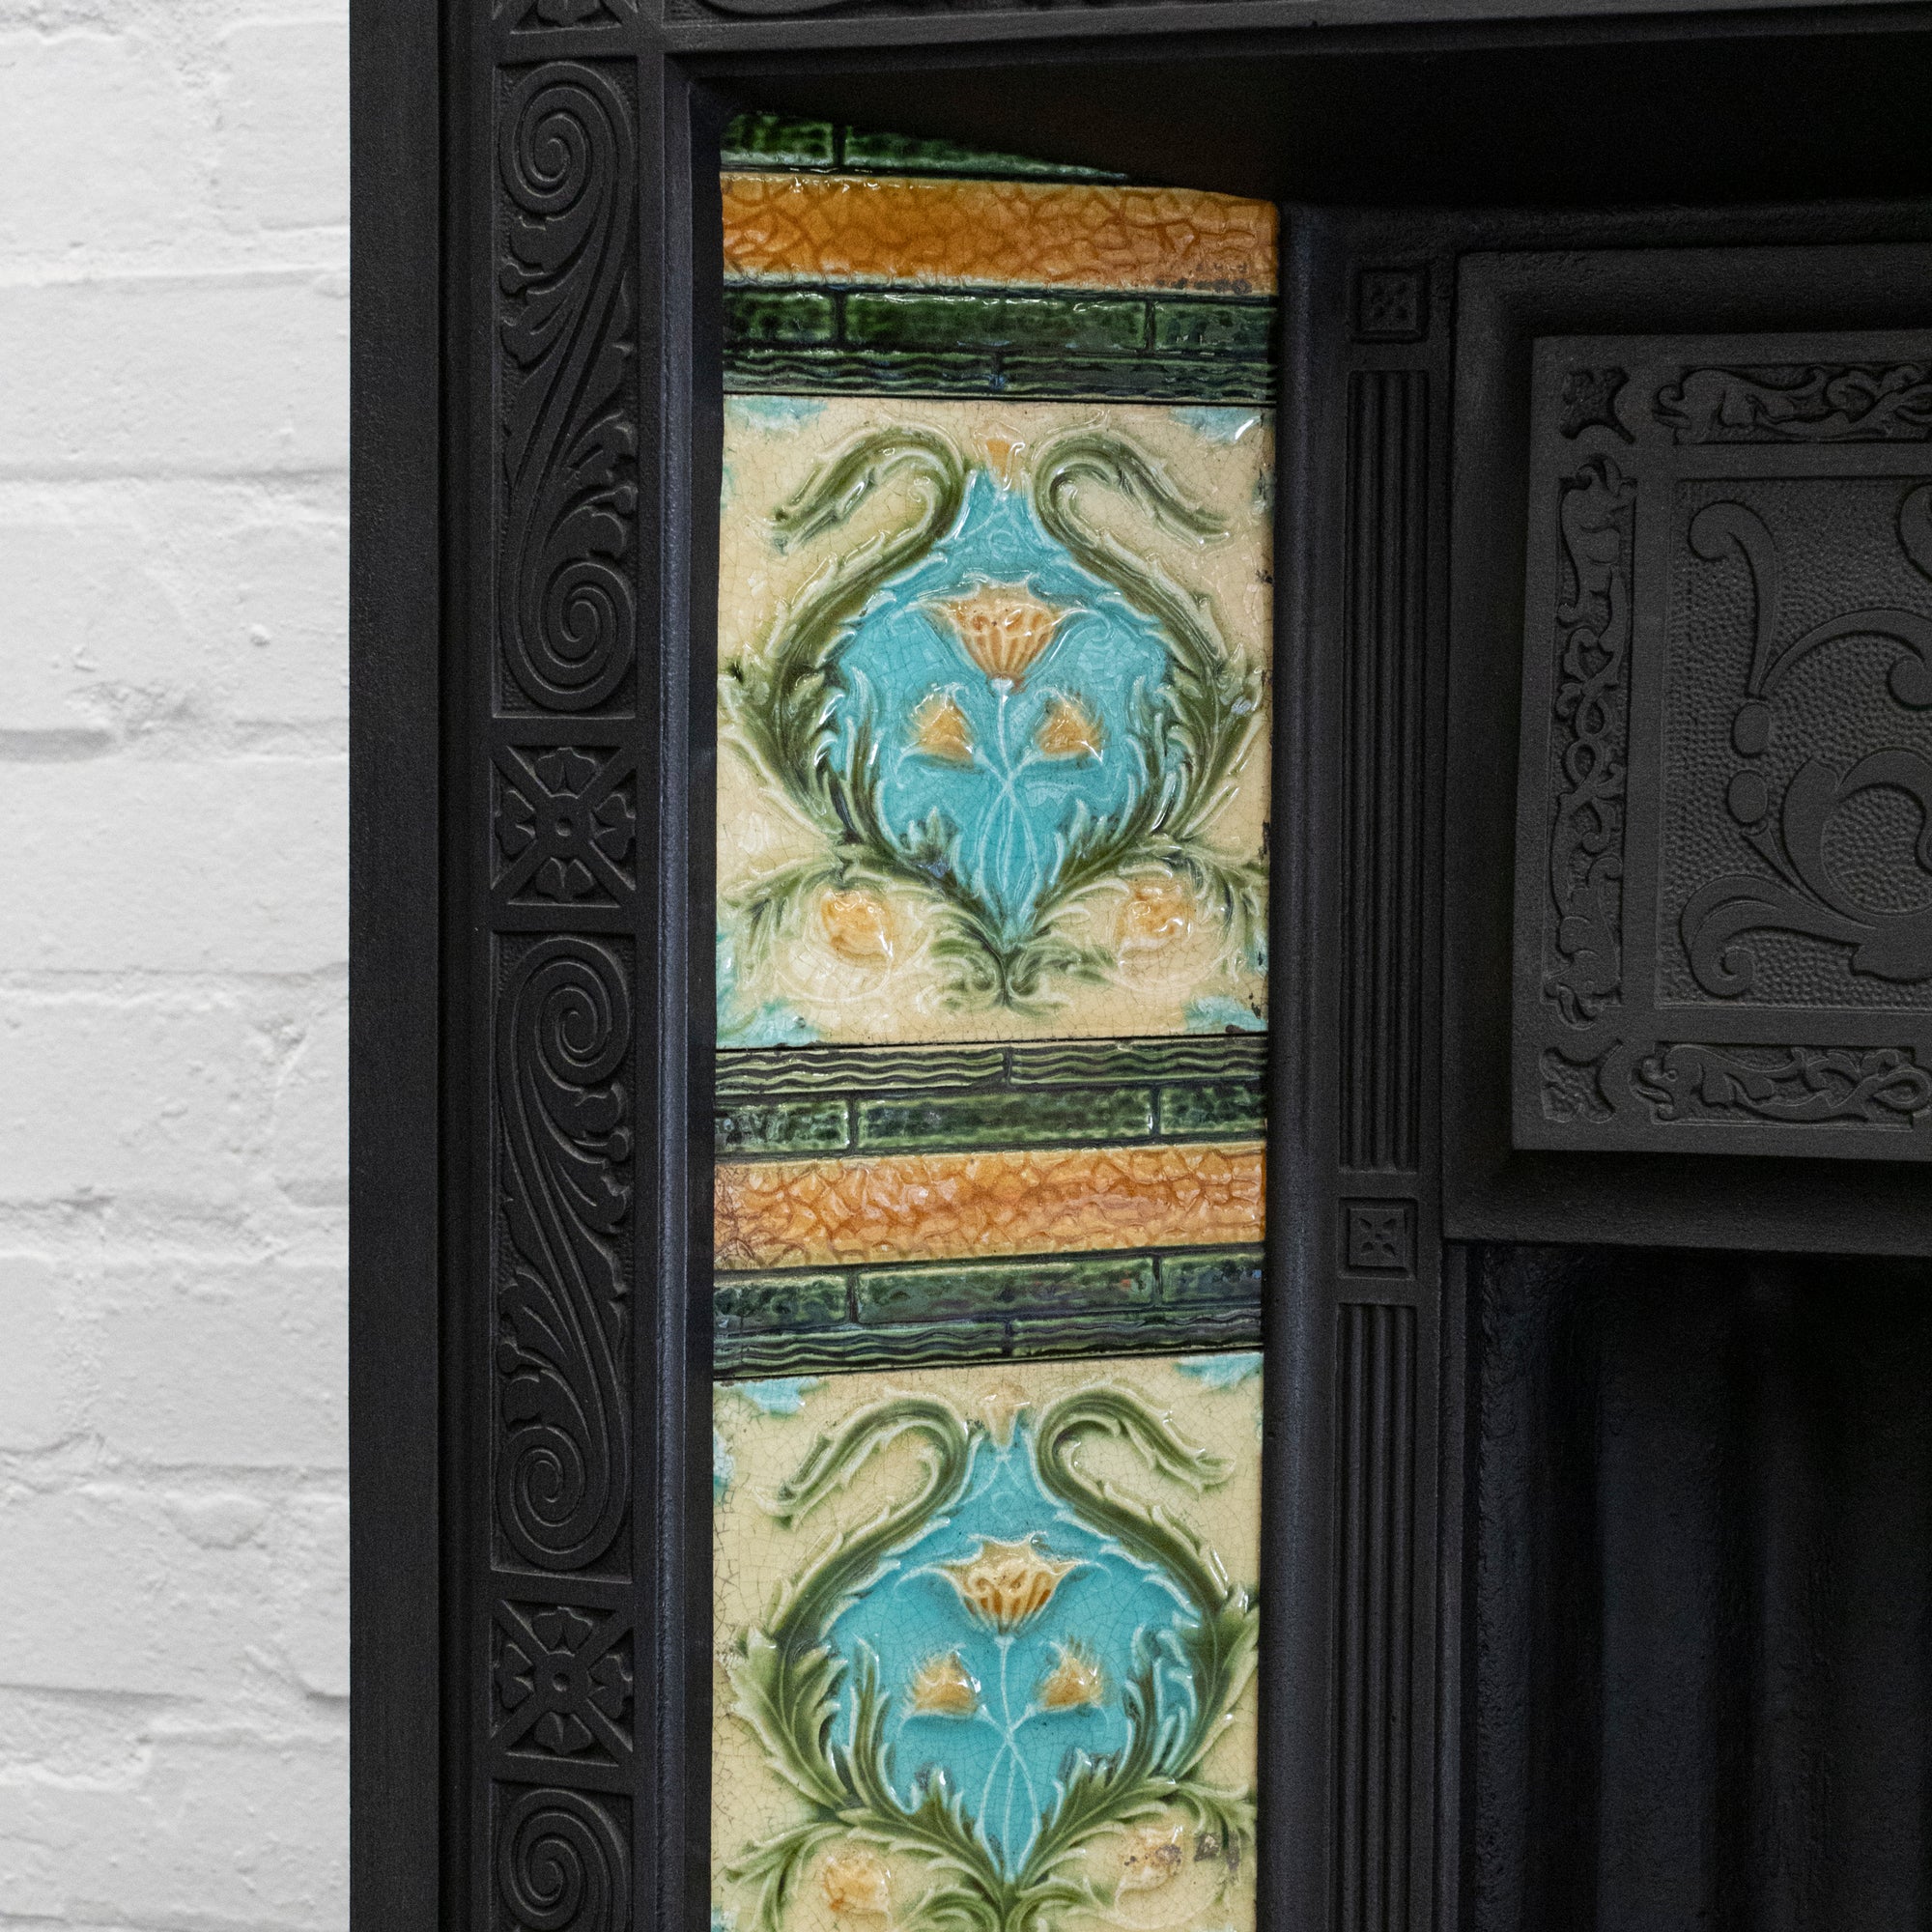 Antique Cast iron Fireplace Insert with Green & Blue Tiles | The Architectural Forum